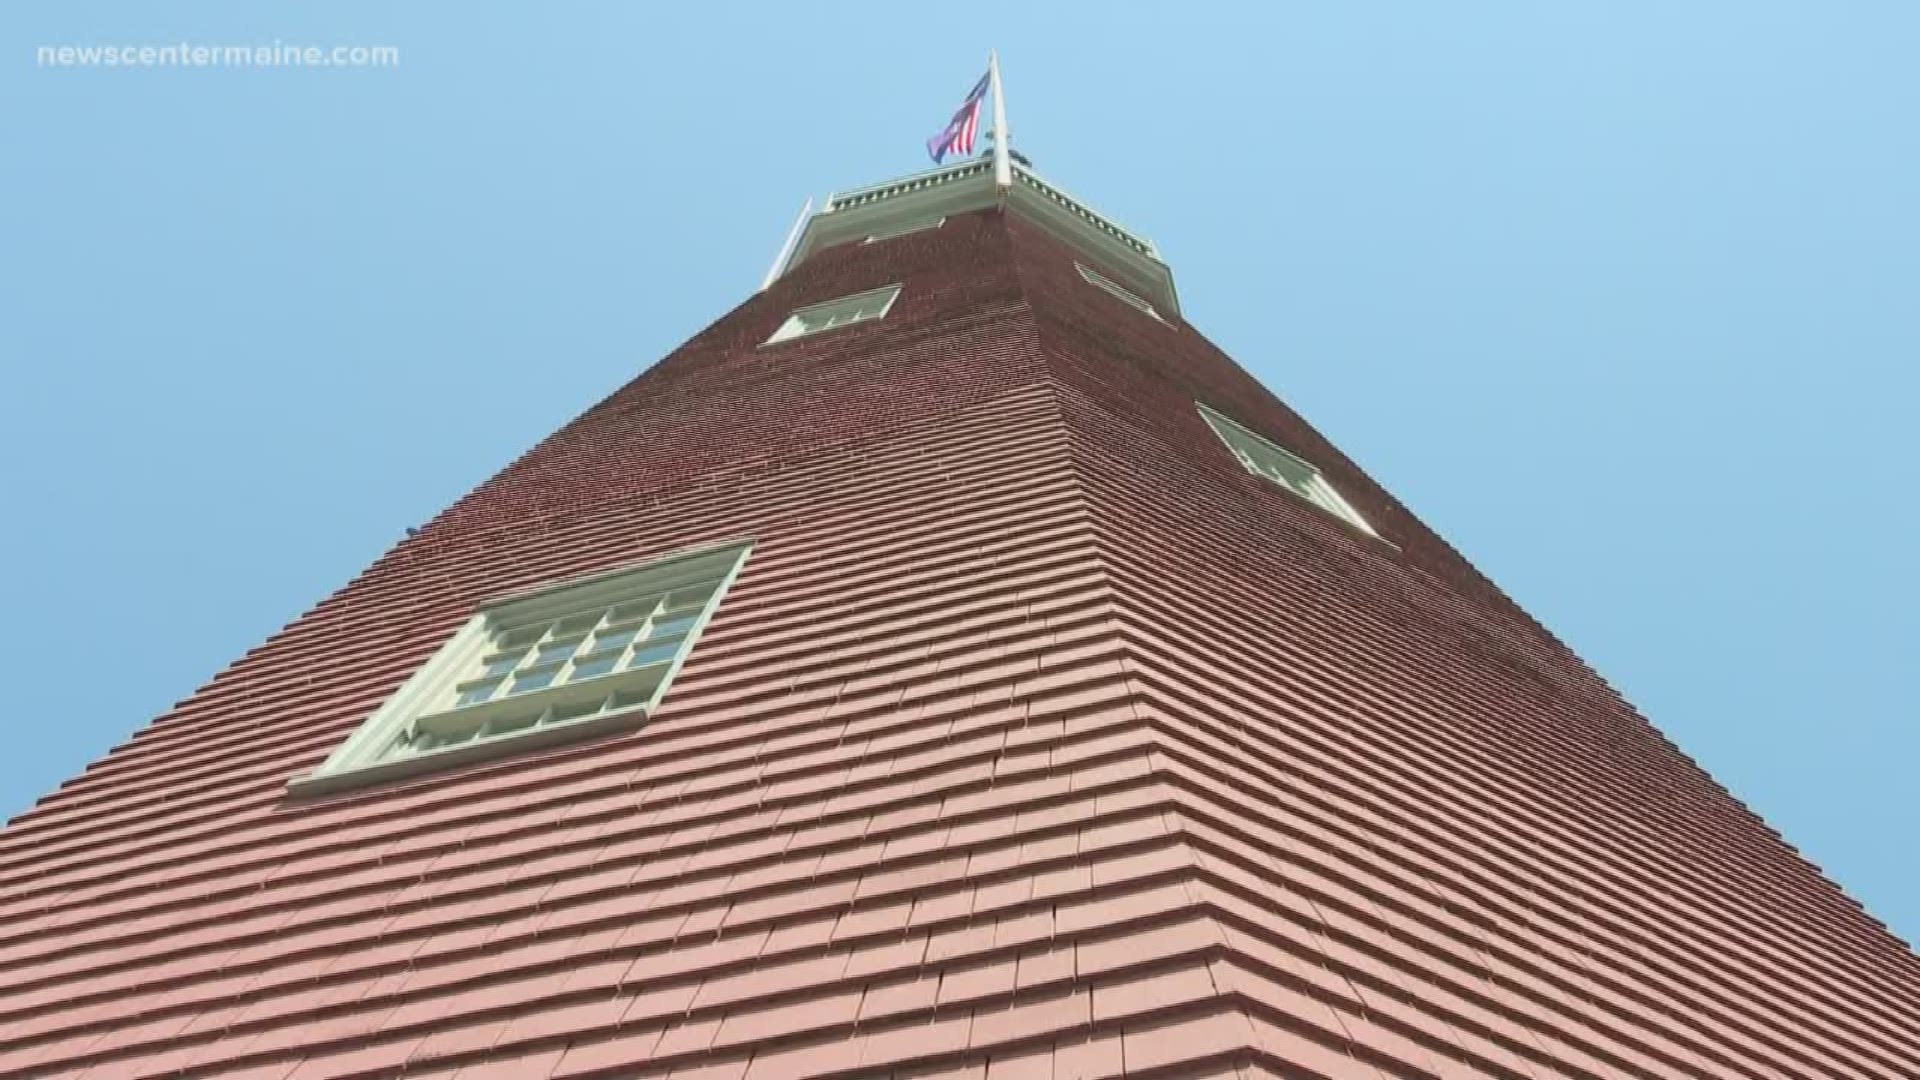 The Portland Observatory celebrated Flag Day on Friday by giving all visitors free admission.